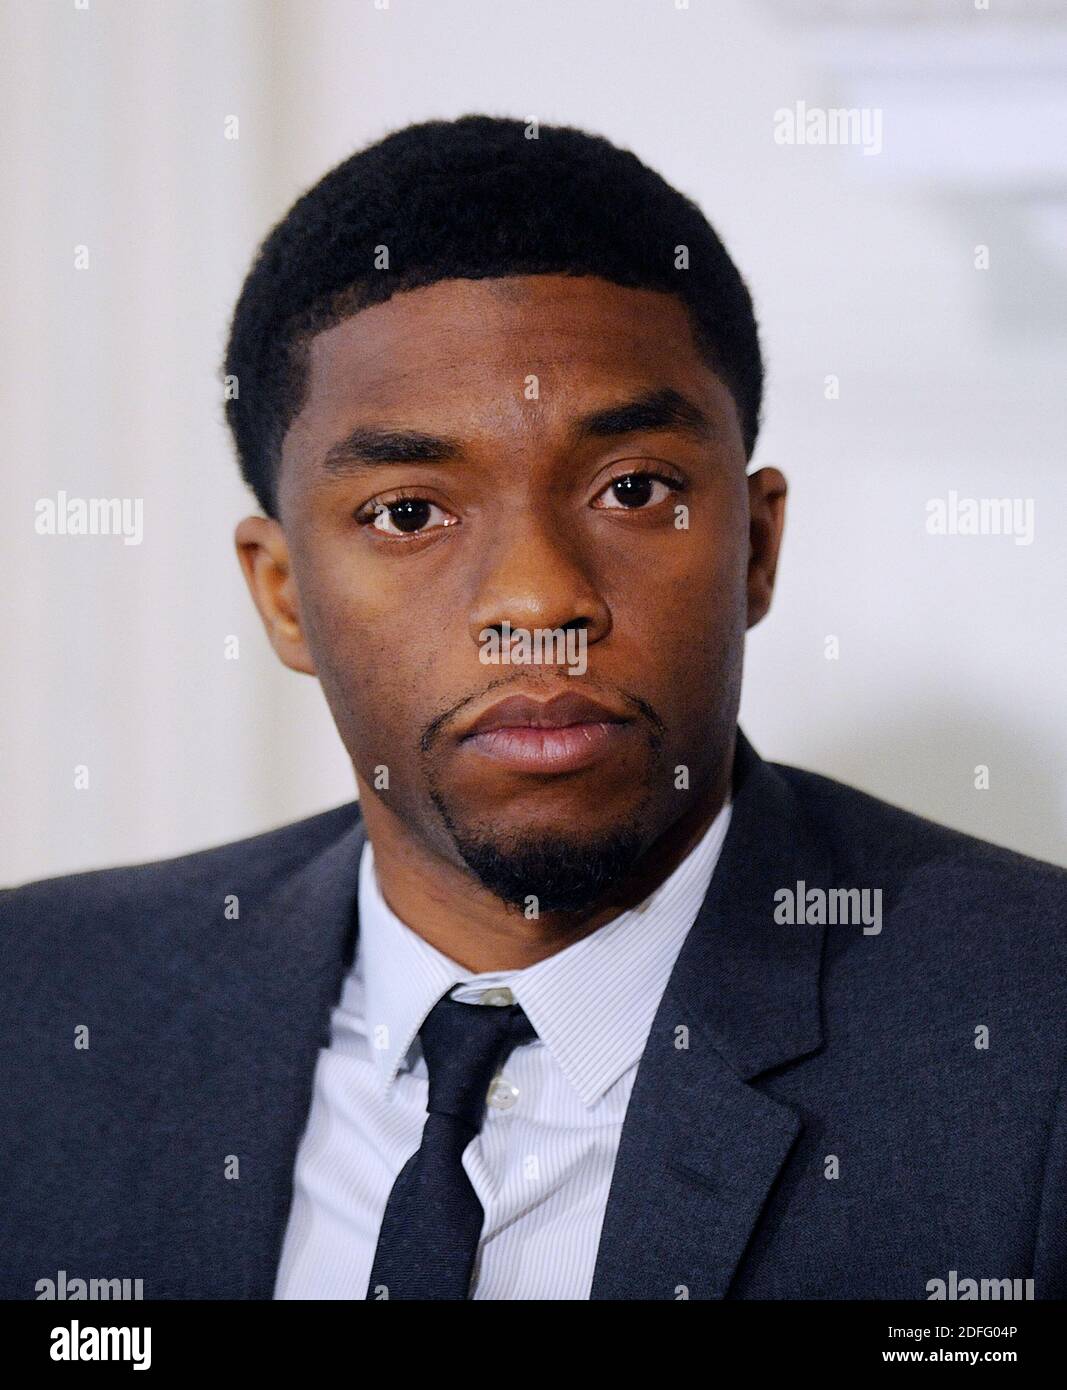 File photo dated April 2, 2013 of Actor Chadwick Boseman listens